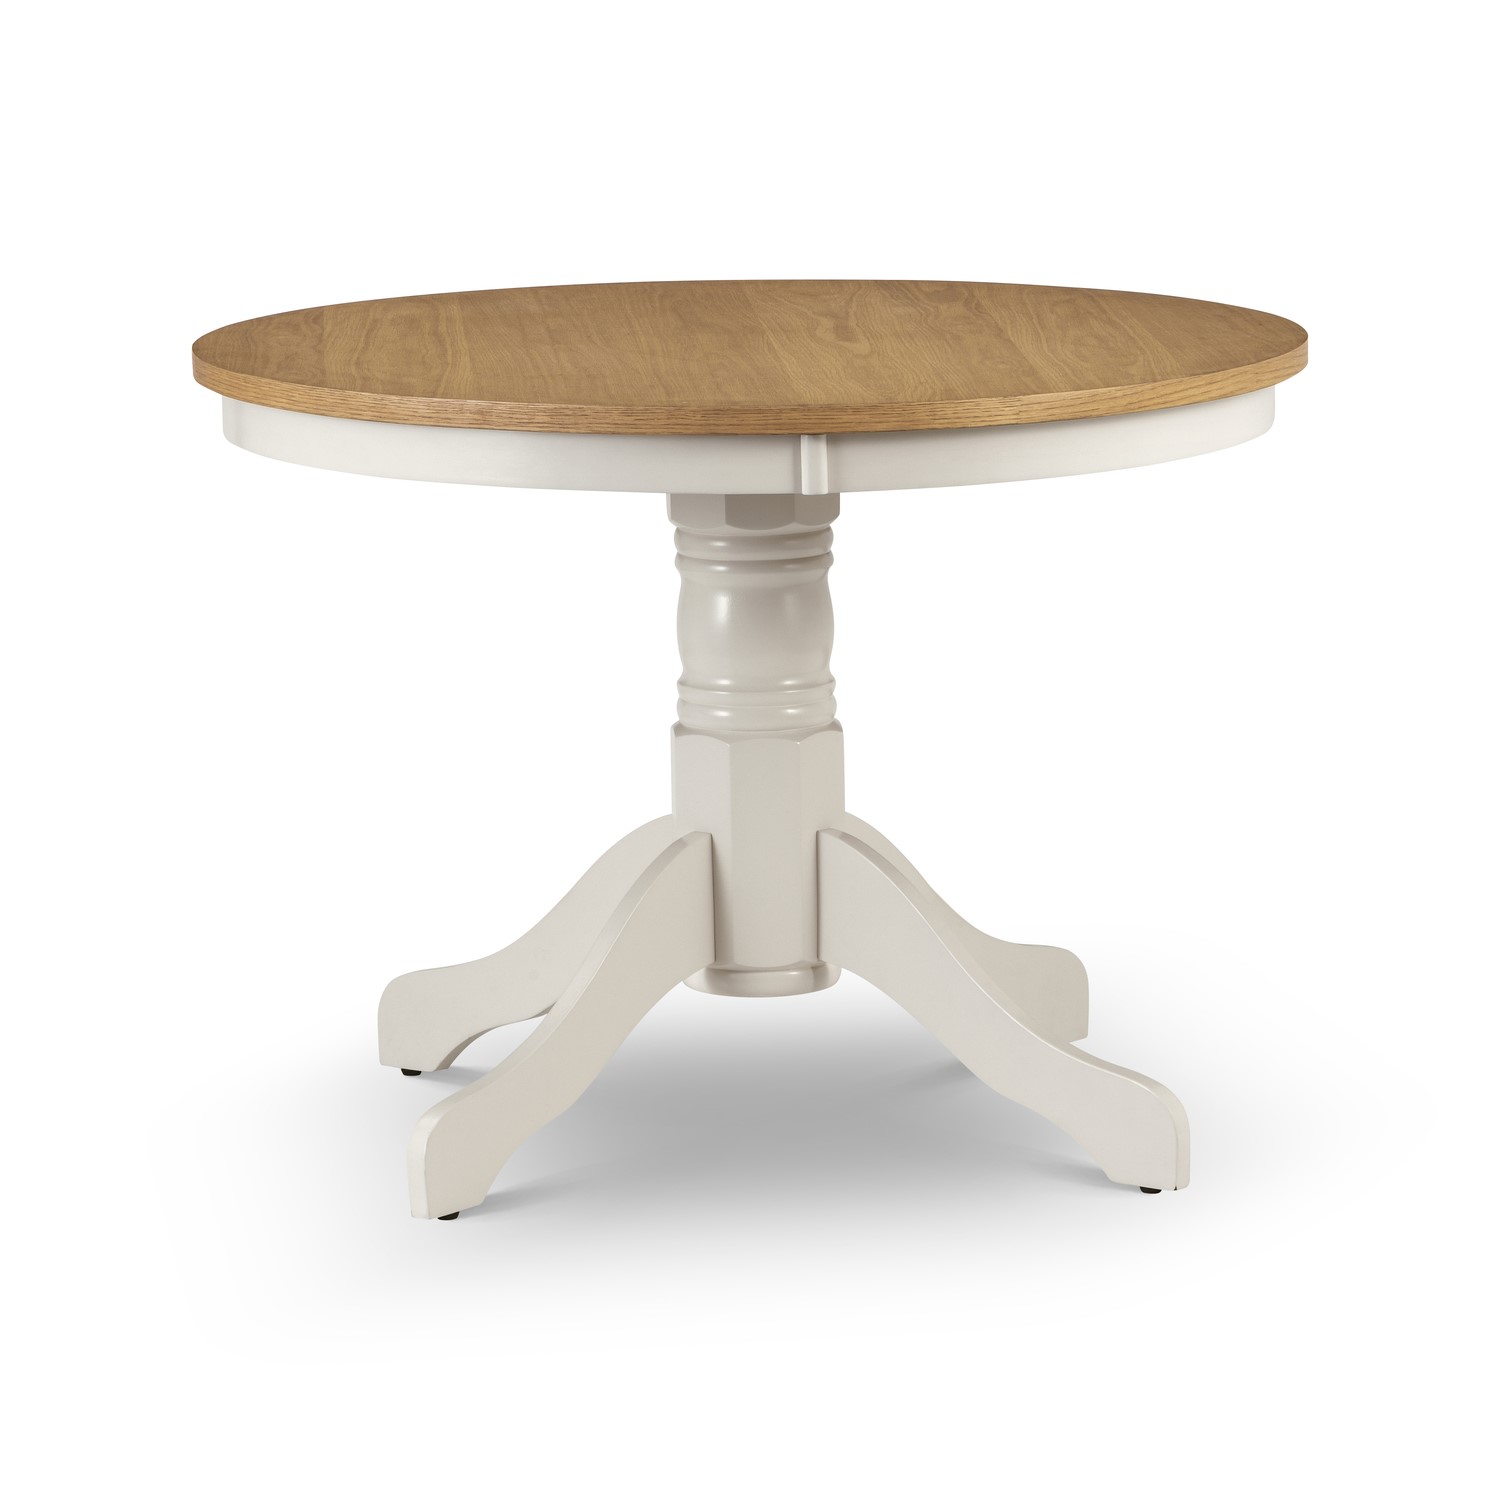 Photo of Round oak top dining table with ivory base - davenport